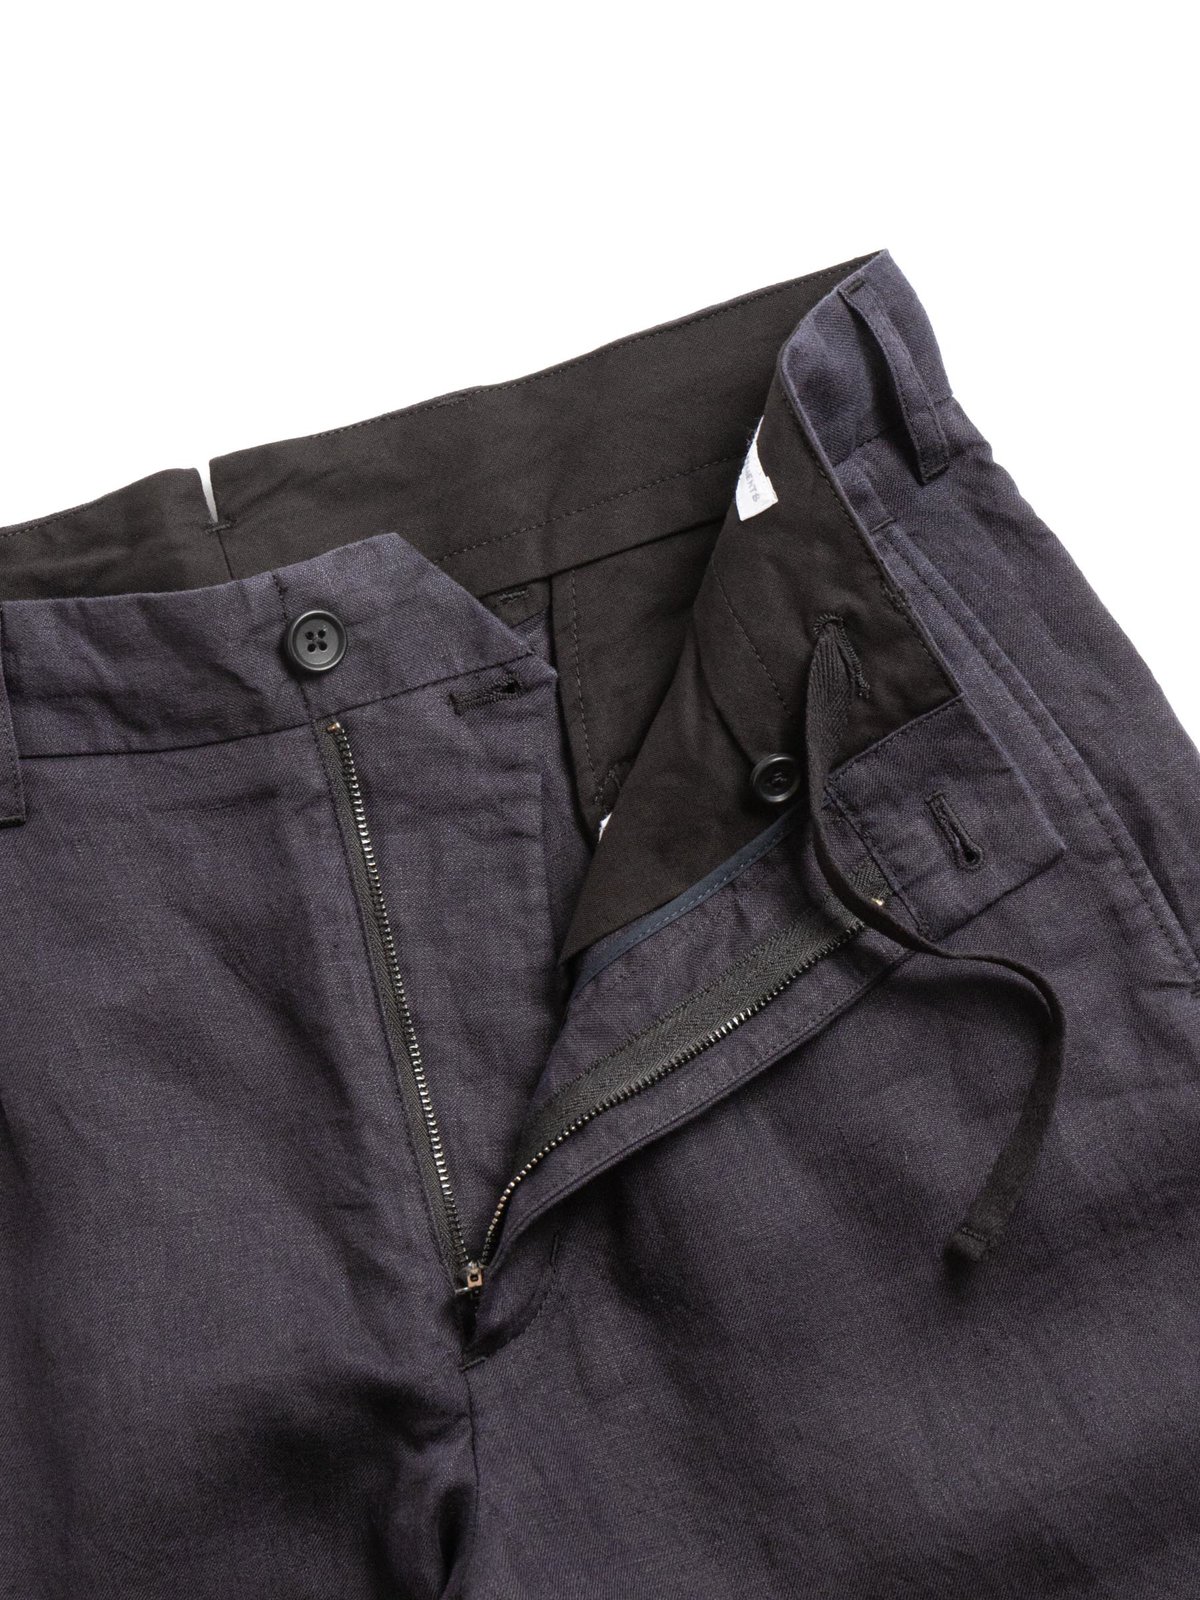 ANDOVER PANT NAVY LINEN TWILL - Image 3